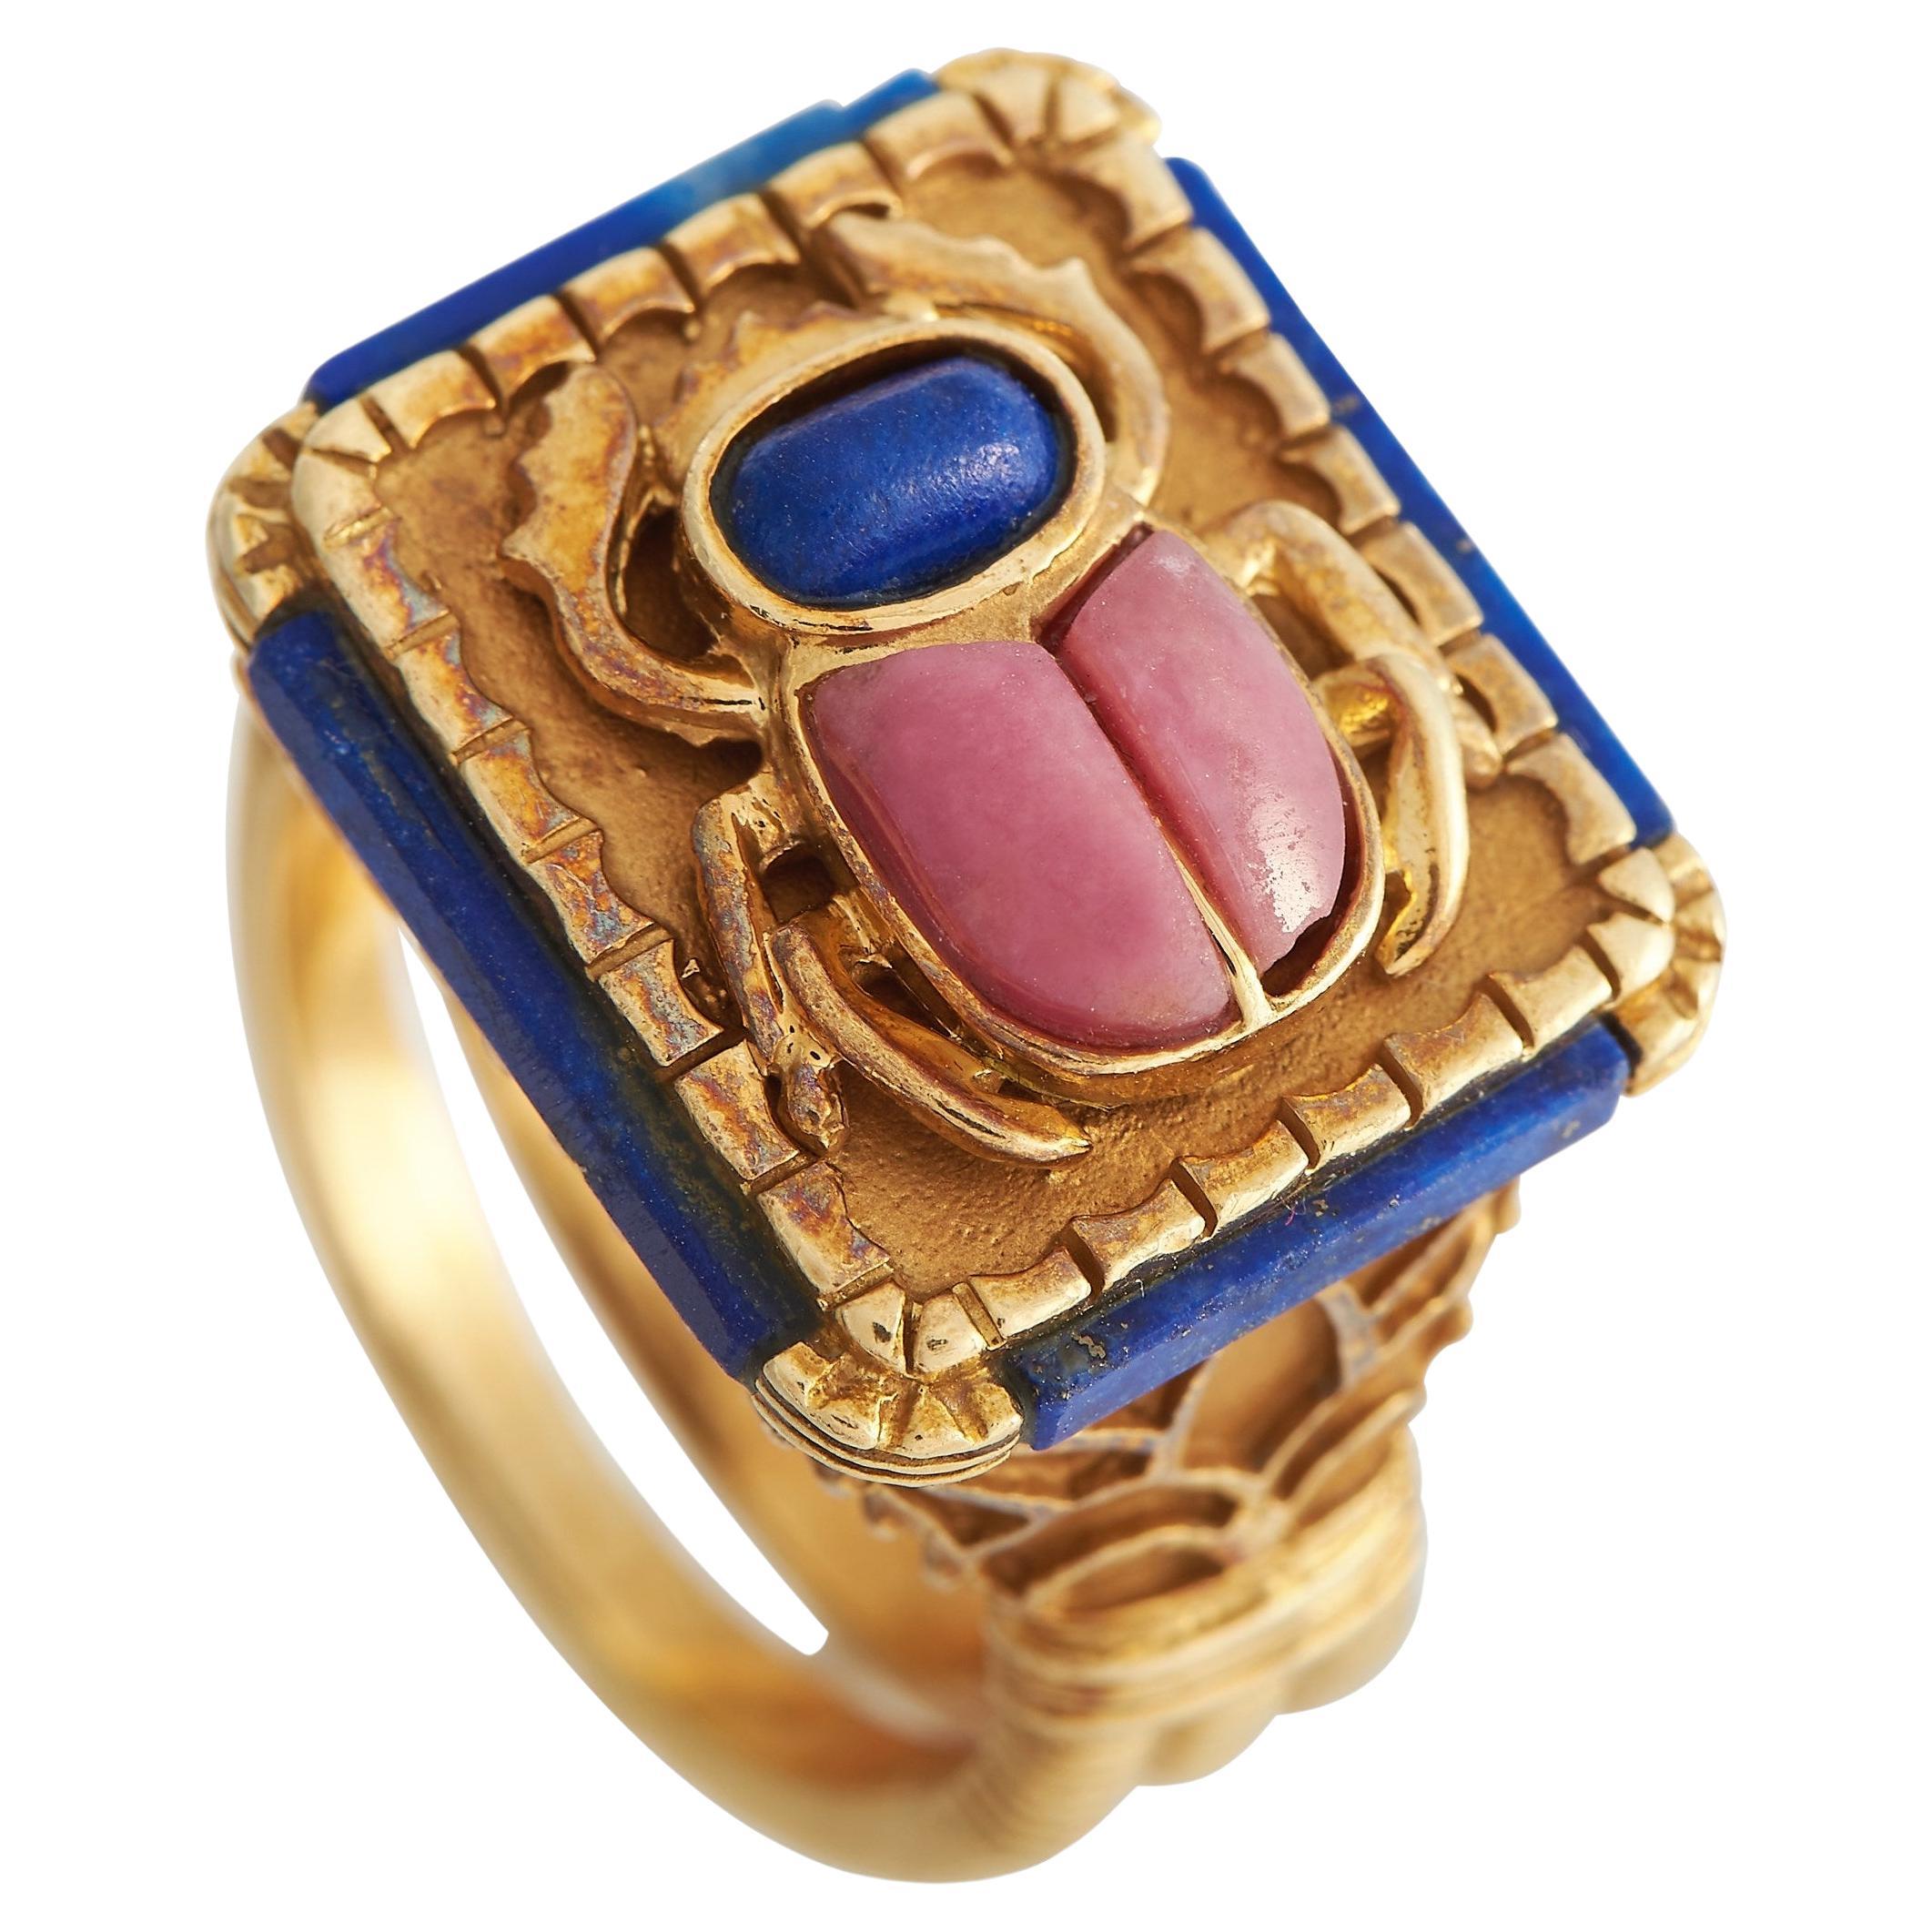 LB Exclusive 18K Yellow Gold Lapis and Rhodochrosite Scarab Ring